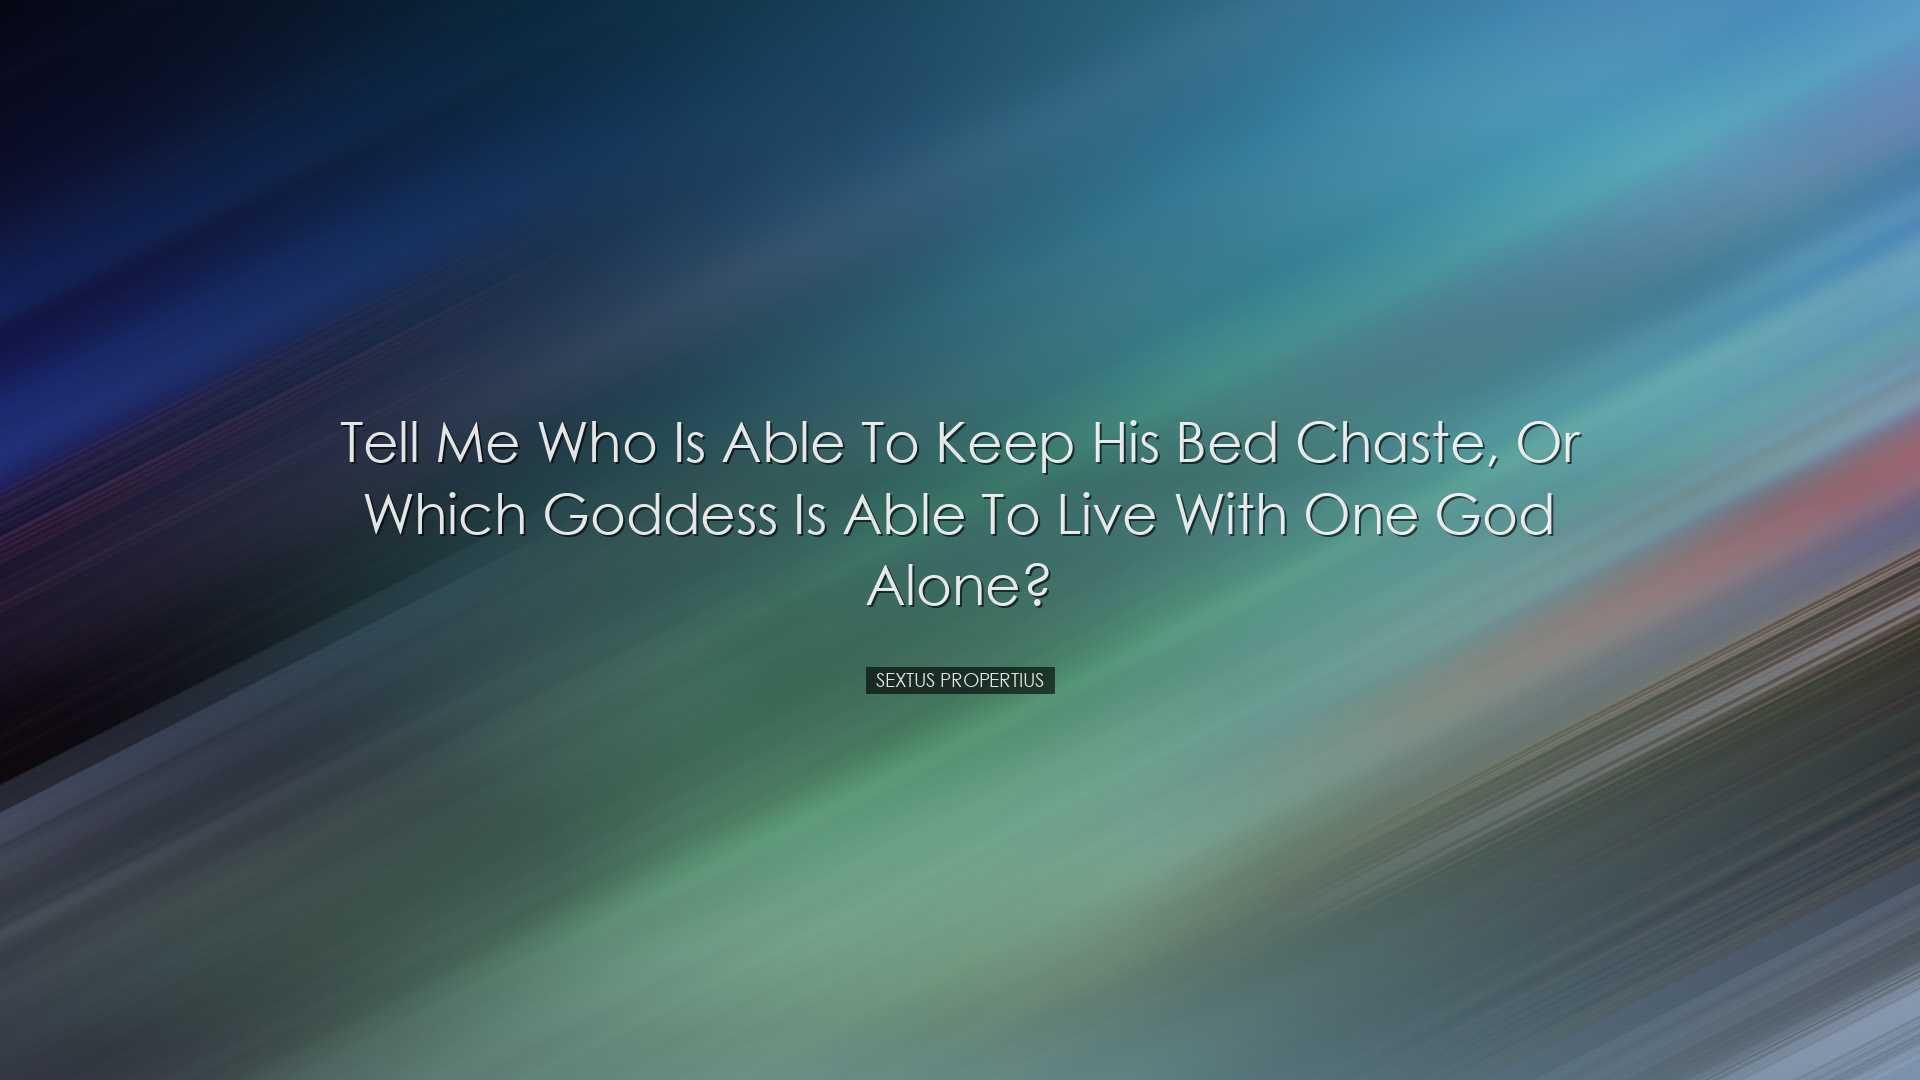 Tell me who is able to keep his bed chaste, or which goddess is ab